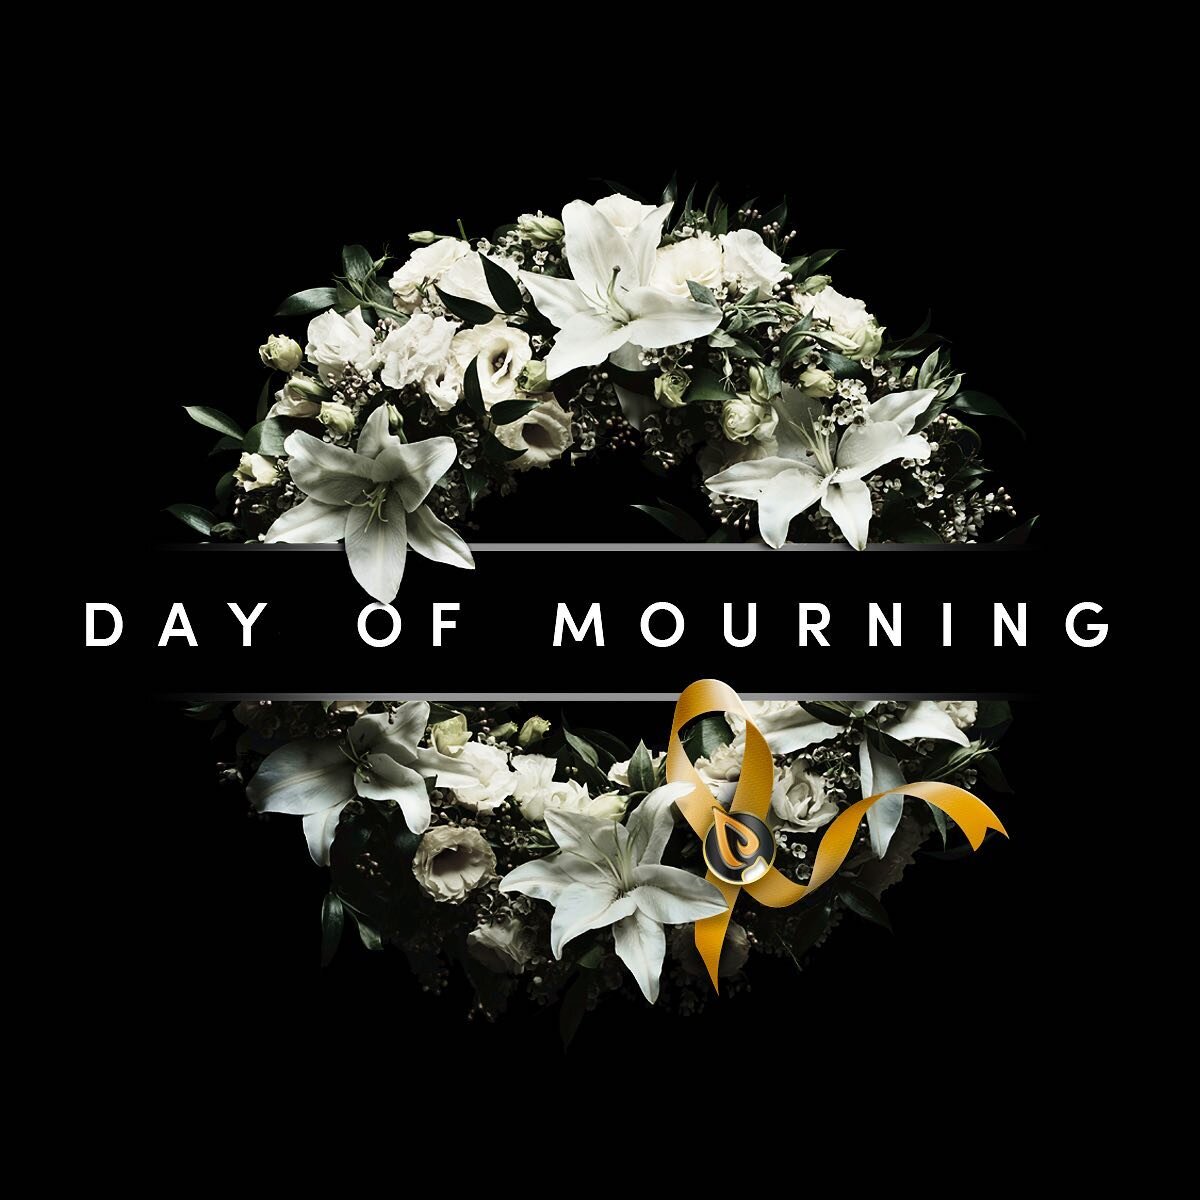 Today is the National Day of Mourning. 

We remember and honour those who have lost their lives, been injured or suffered illness in the workplace.🎗

Click the link in our bio for resources.
&ndash; Threads of life provides services like grief couns